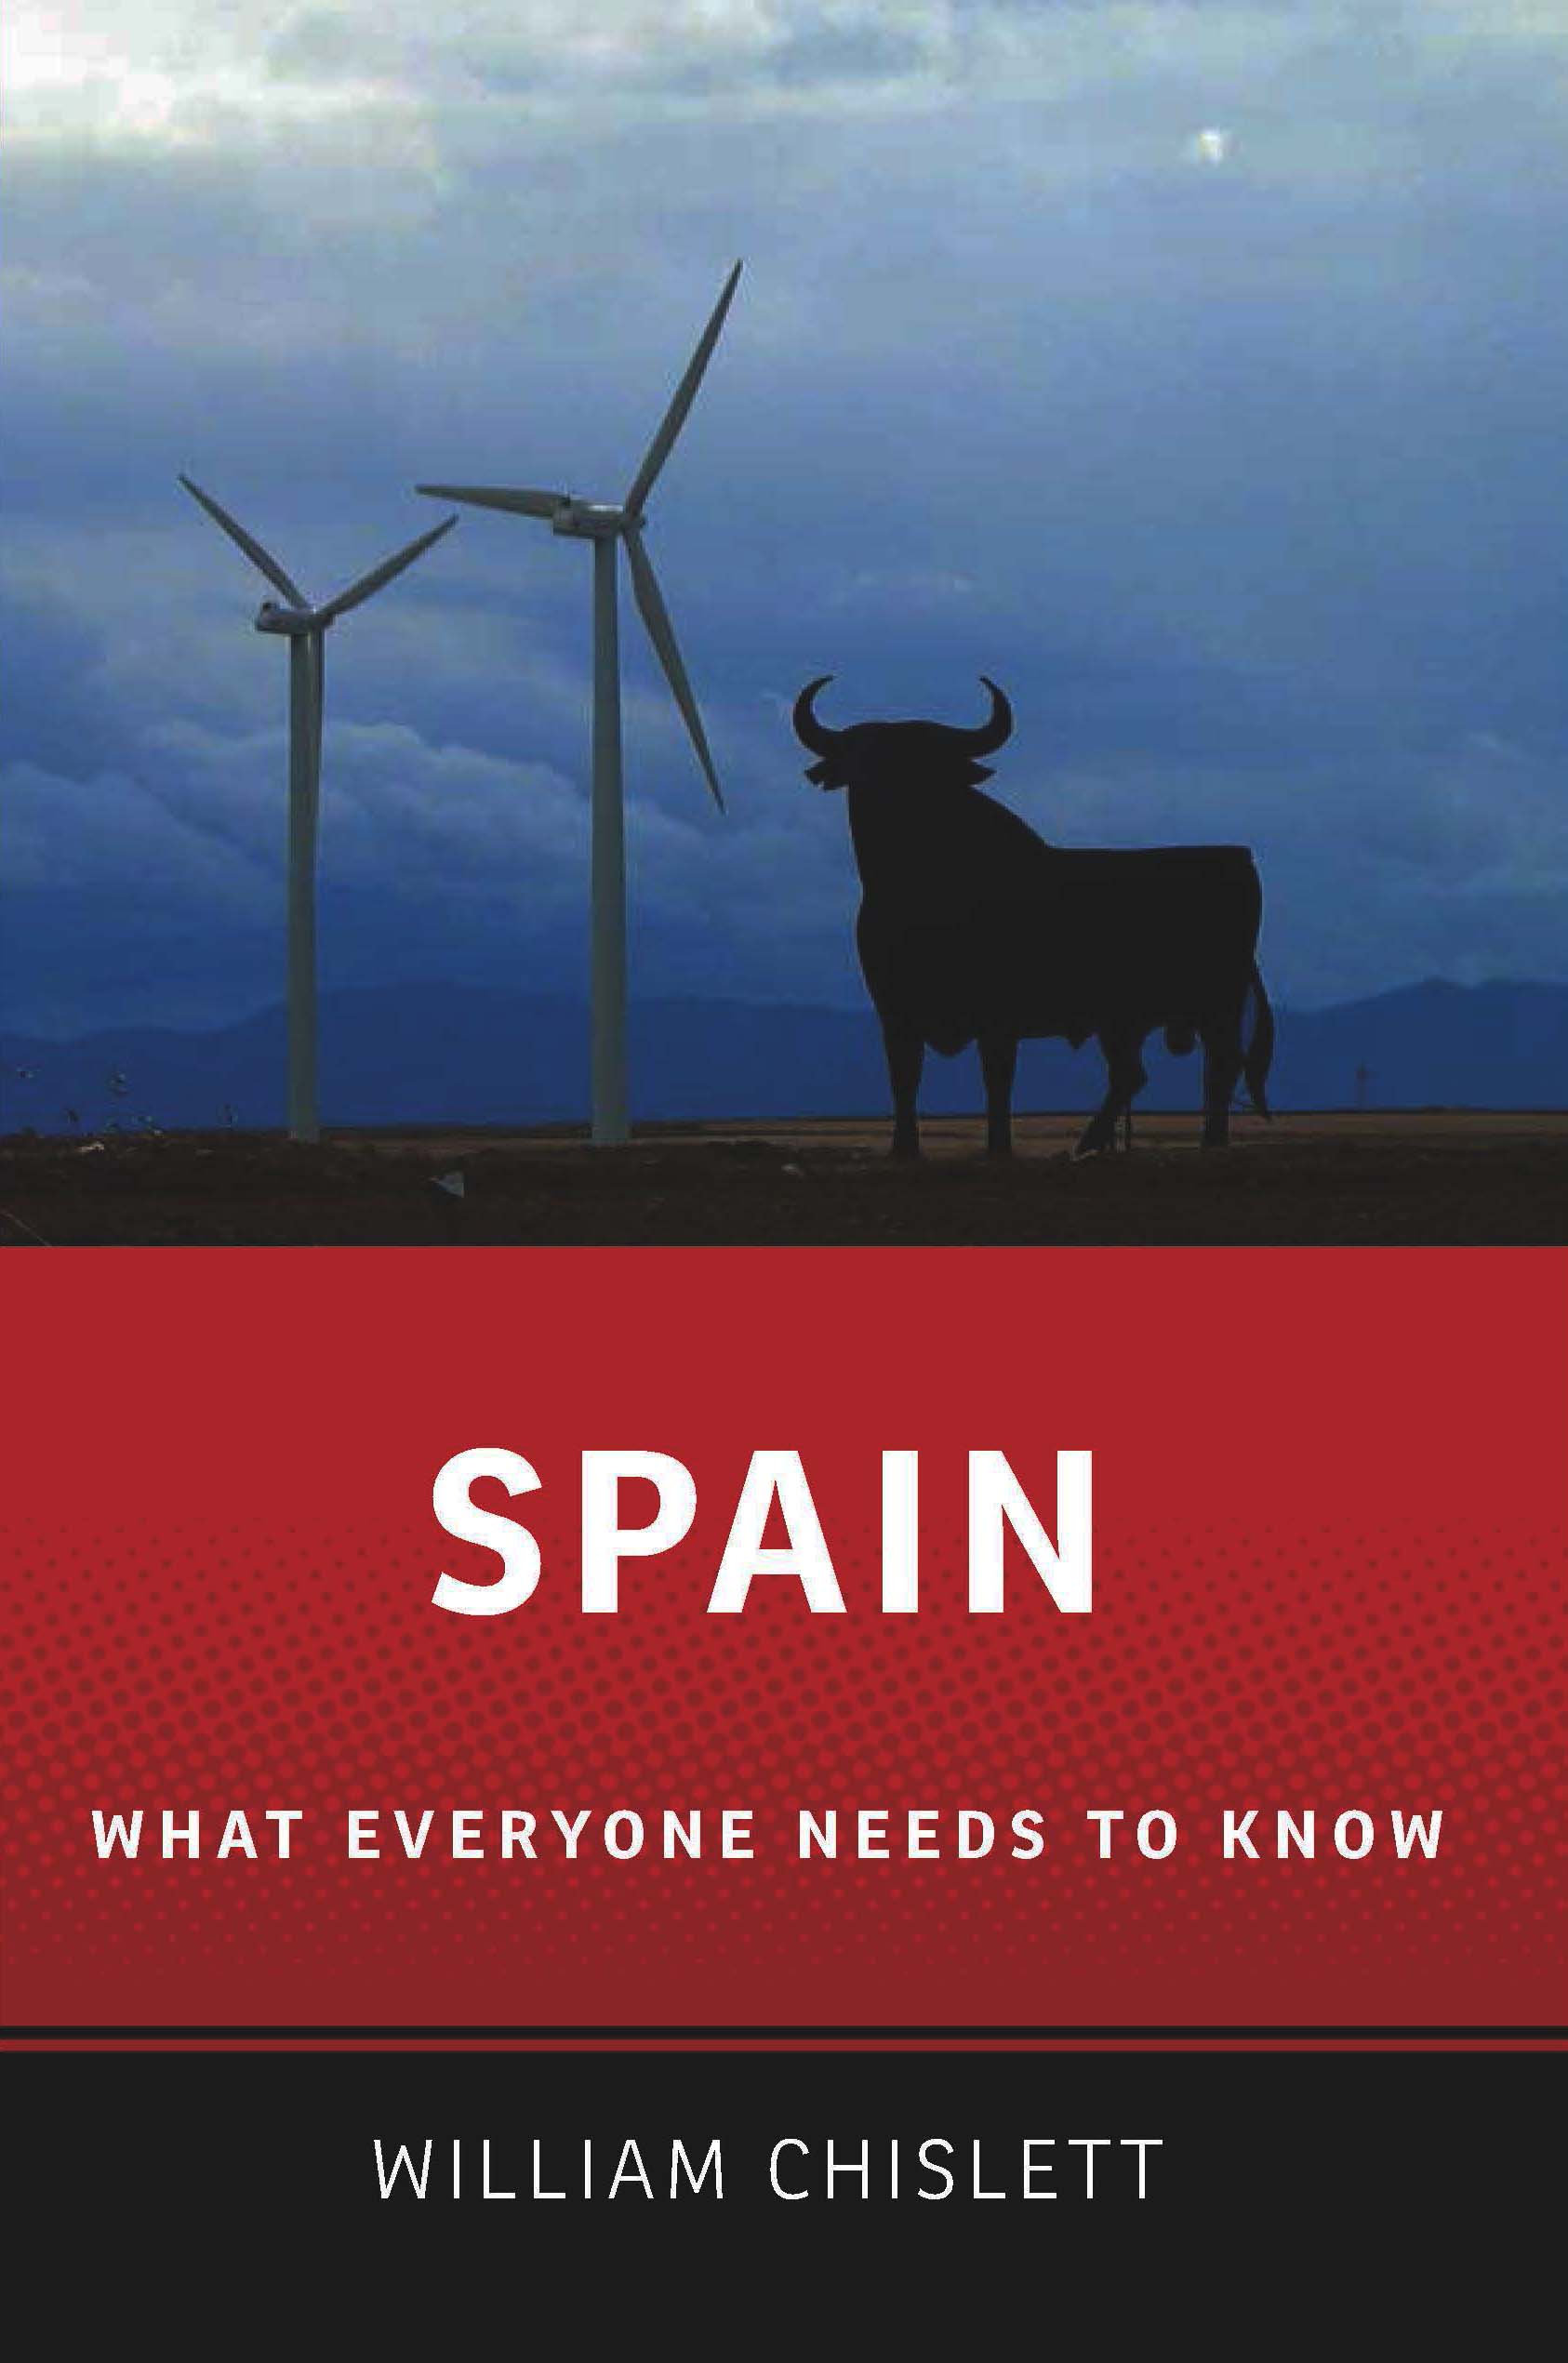 Spain: What everyone needs to know